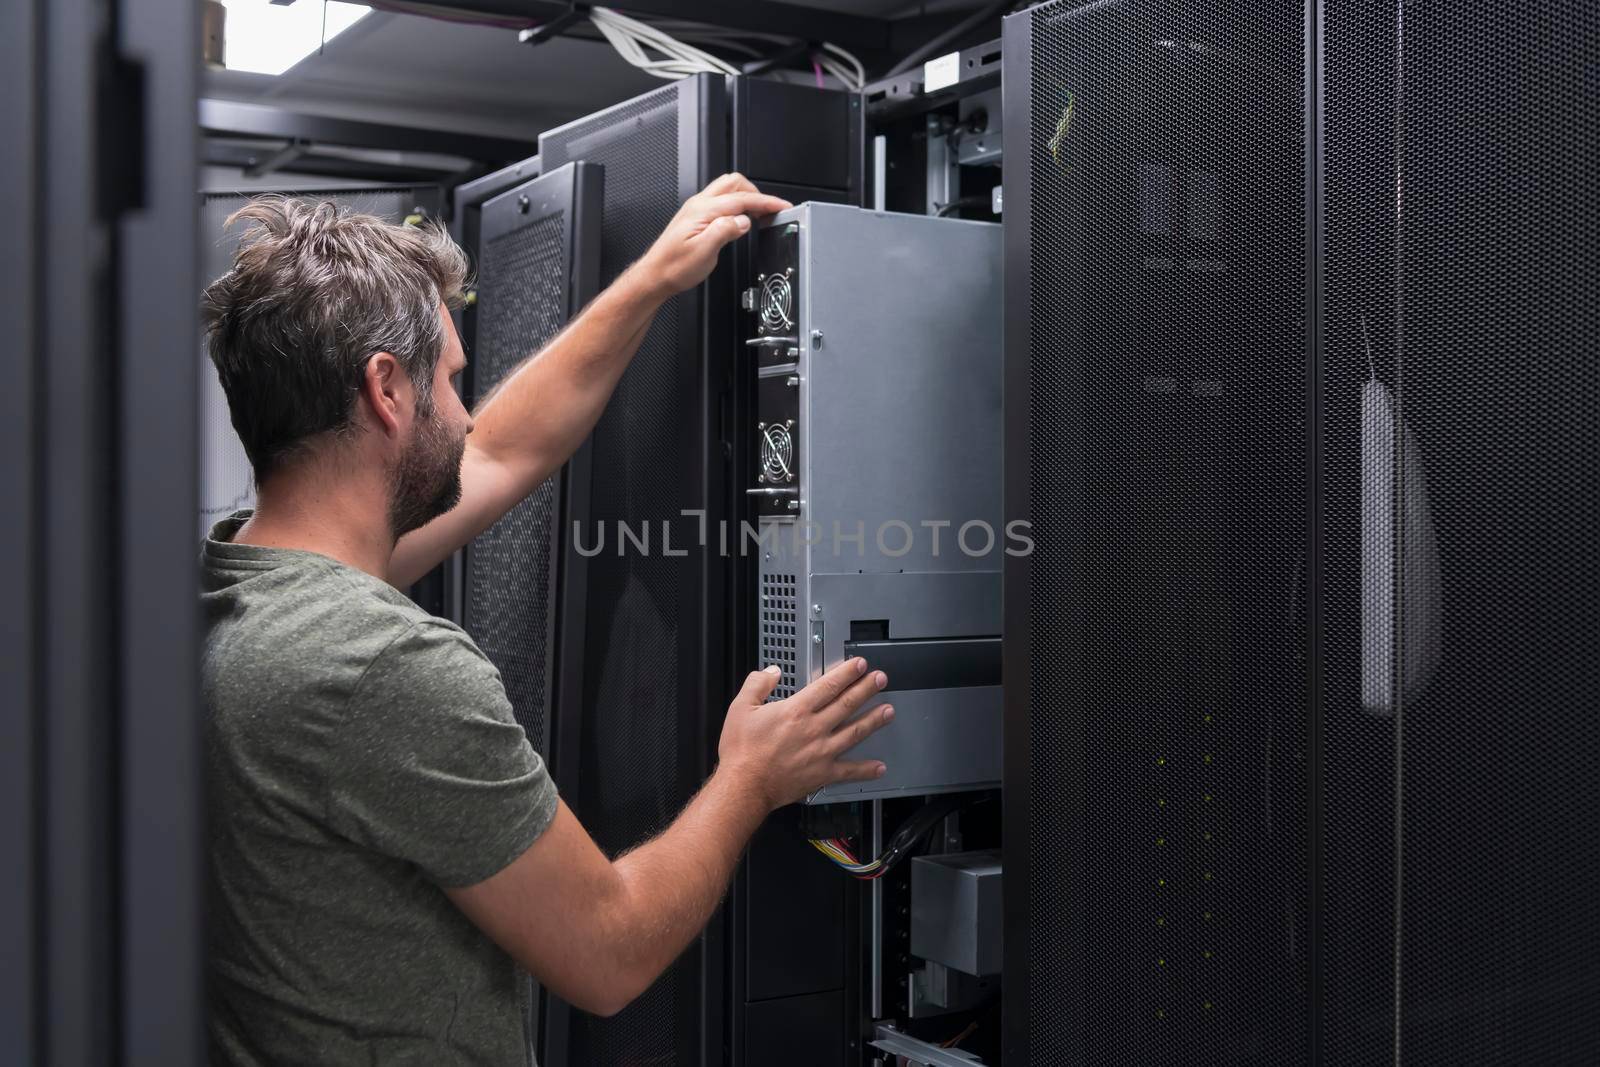 IT engineer working In the server room or data center. The technician puts in a rack a new server of corporate business mainframe supercomputer or cryptocurrency mining farm.